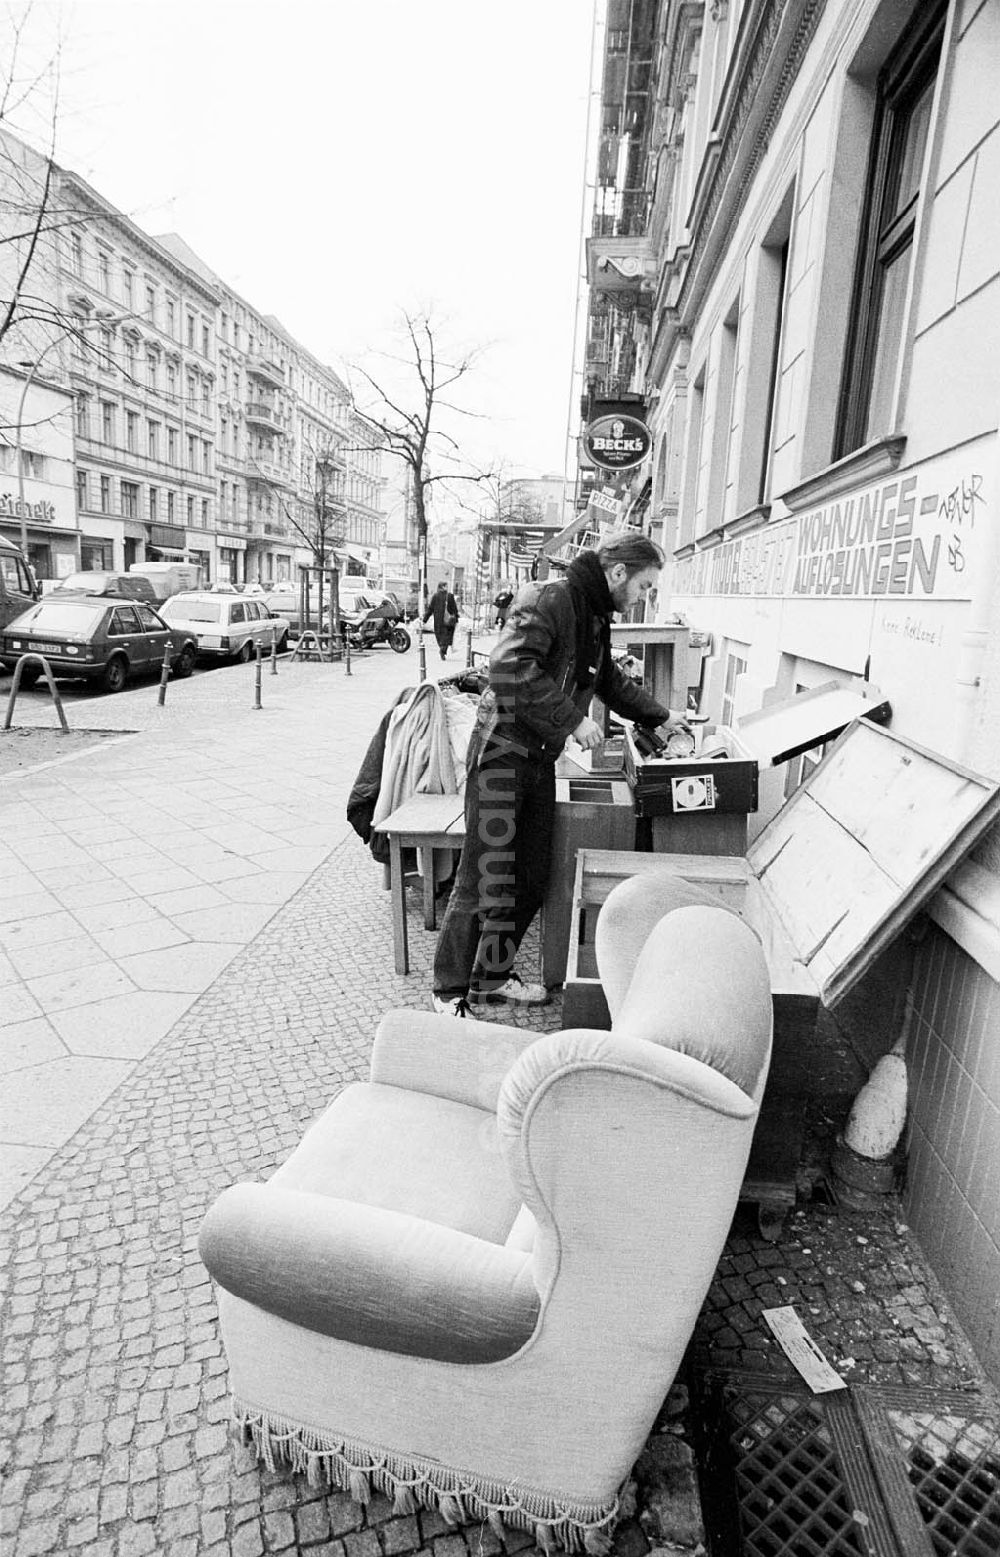 GDR photo archive: Berlin - Umschlagsnr.: 1993-48 (b)